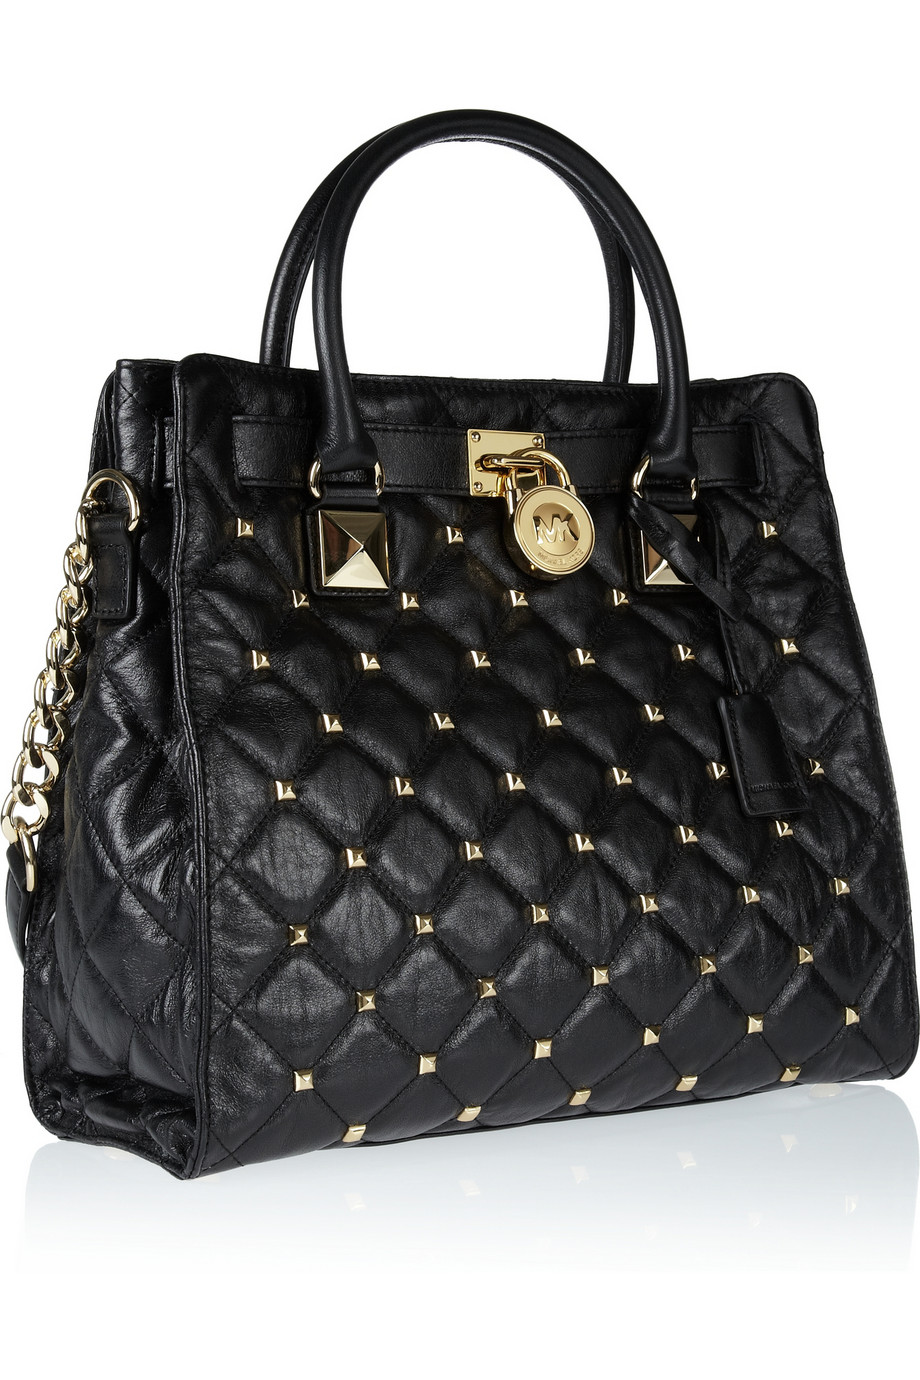 MICHAEL Michael Kors Hamilton Studded Quilted Leather Tote in Black | Lyst